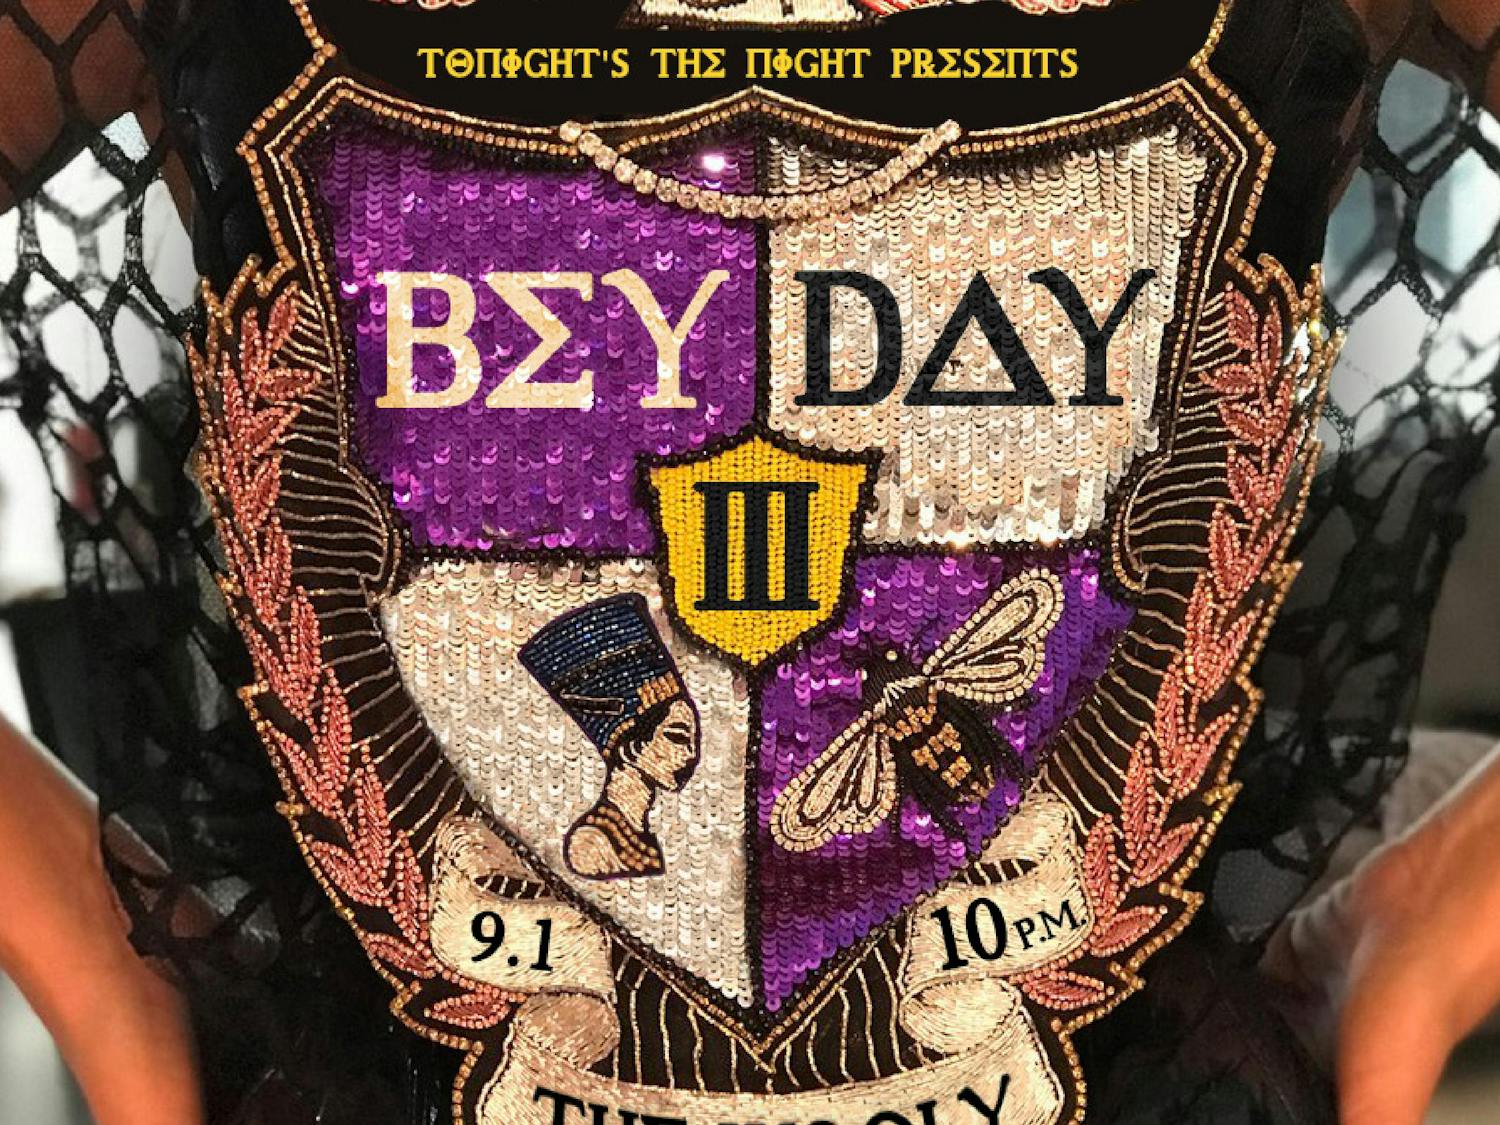 bey day 2018